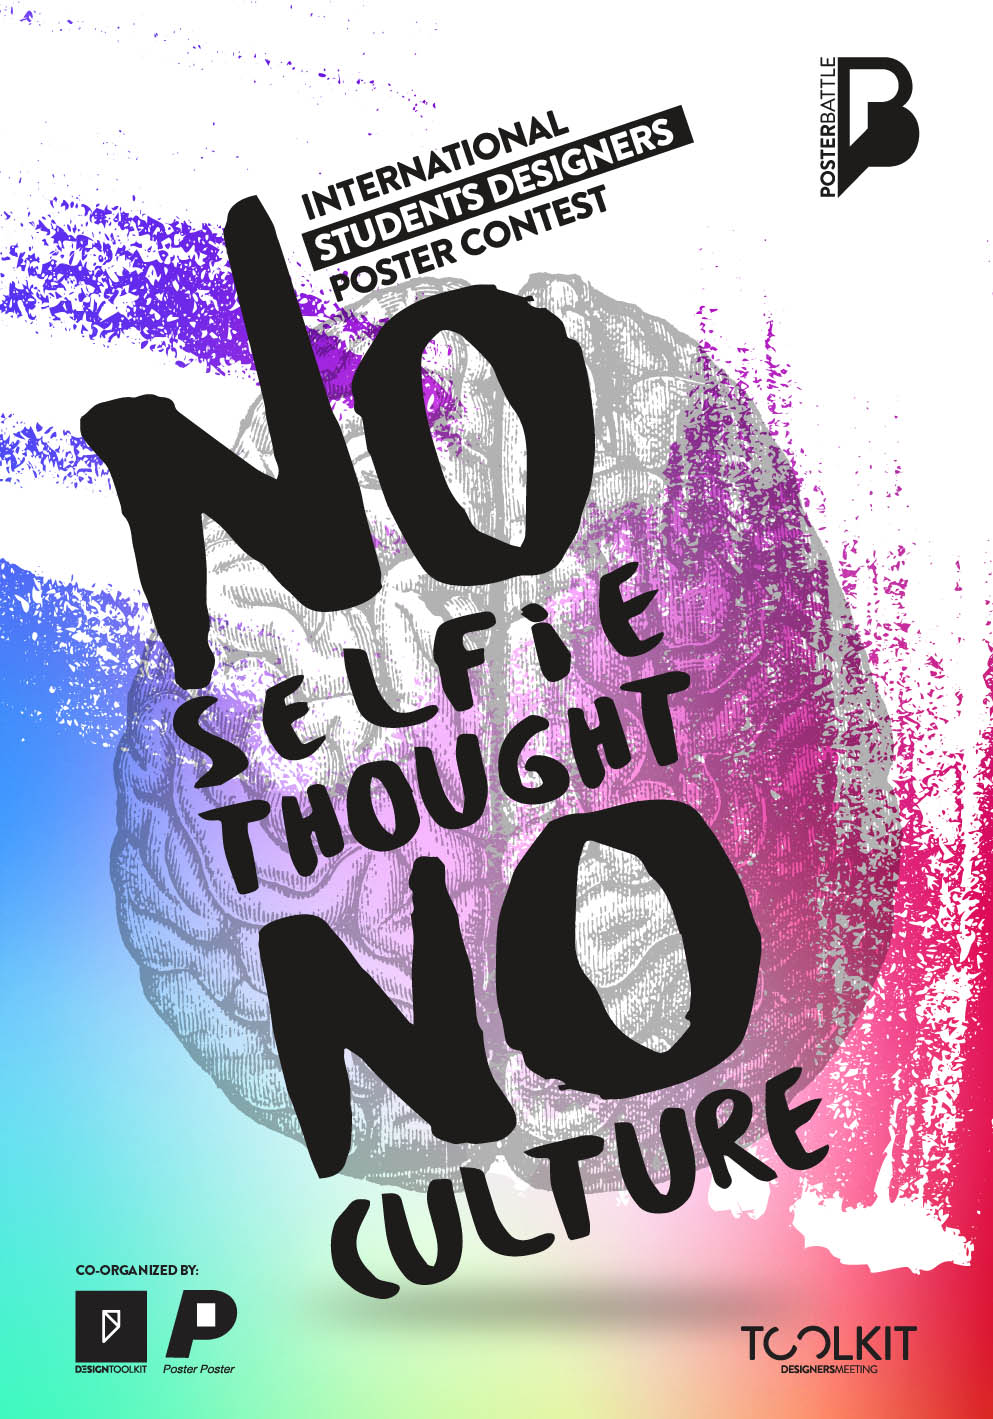 Toolkit Designers Meeting 2016 |Poster Battle 2016 Διαγωνισμός Αφίσας µε θέμα: Νο Selfie Thought – No Culture